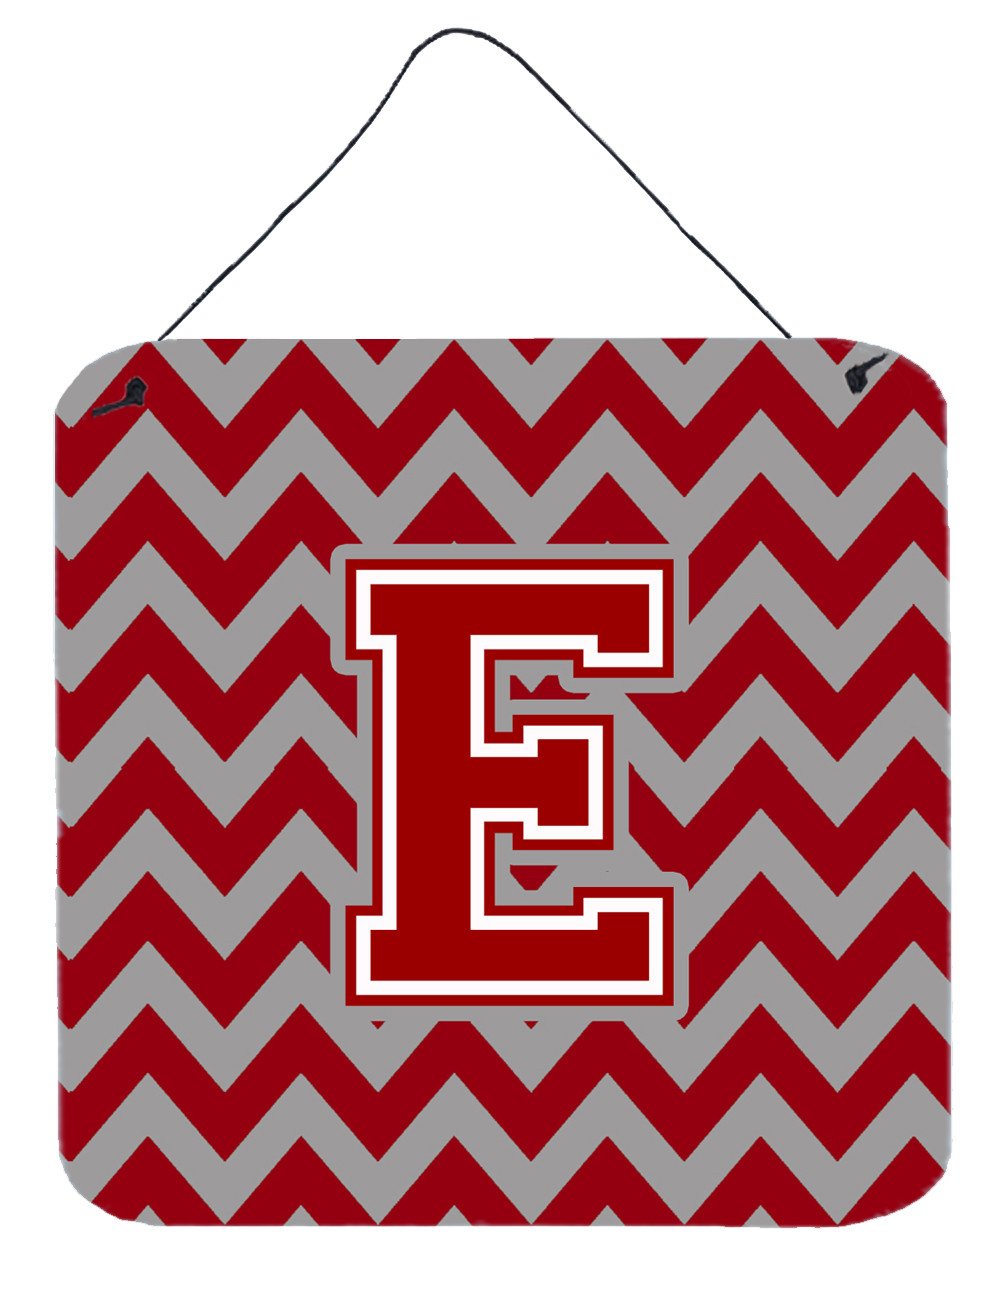 Letter E Chevron Maroon and White Wall or Door Hanging Prints CJ1049-EDS66 by Caroline's Treasures